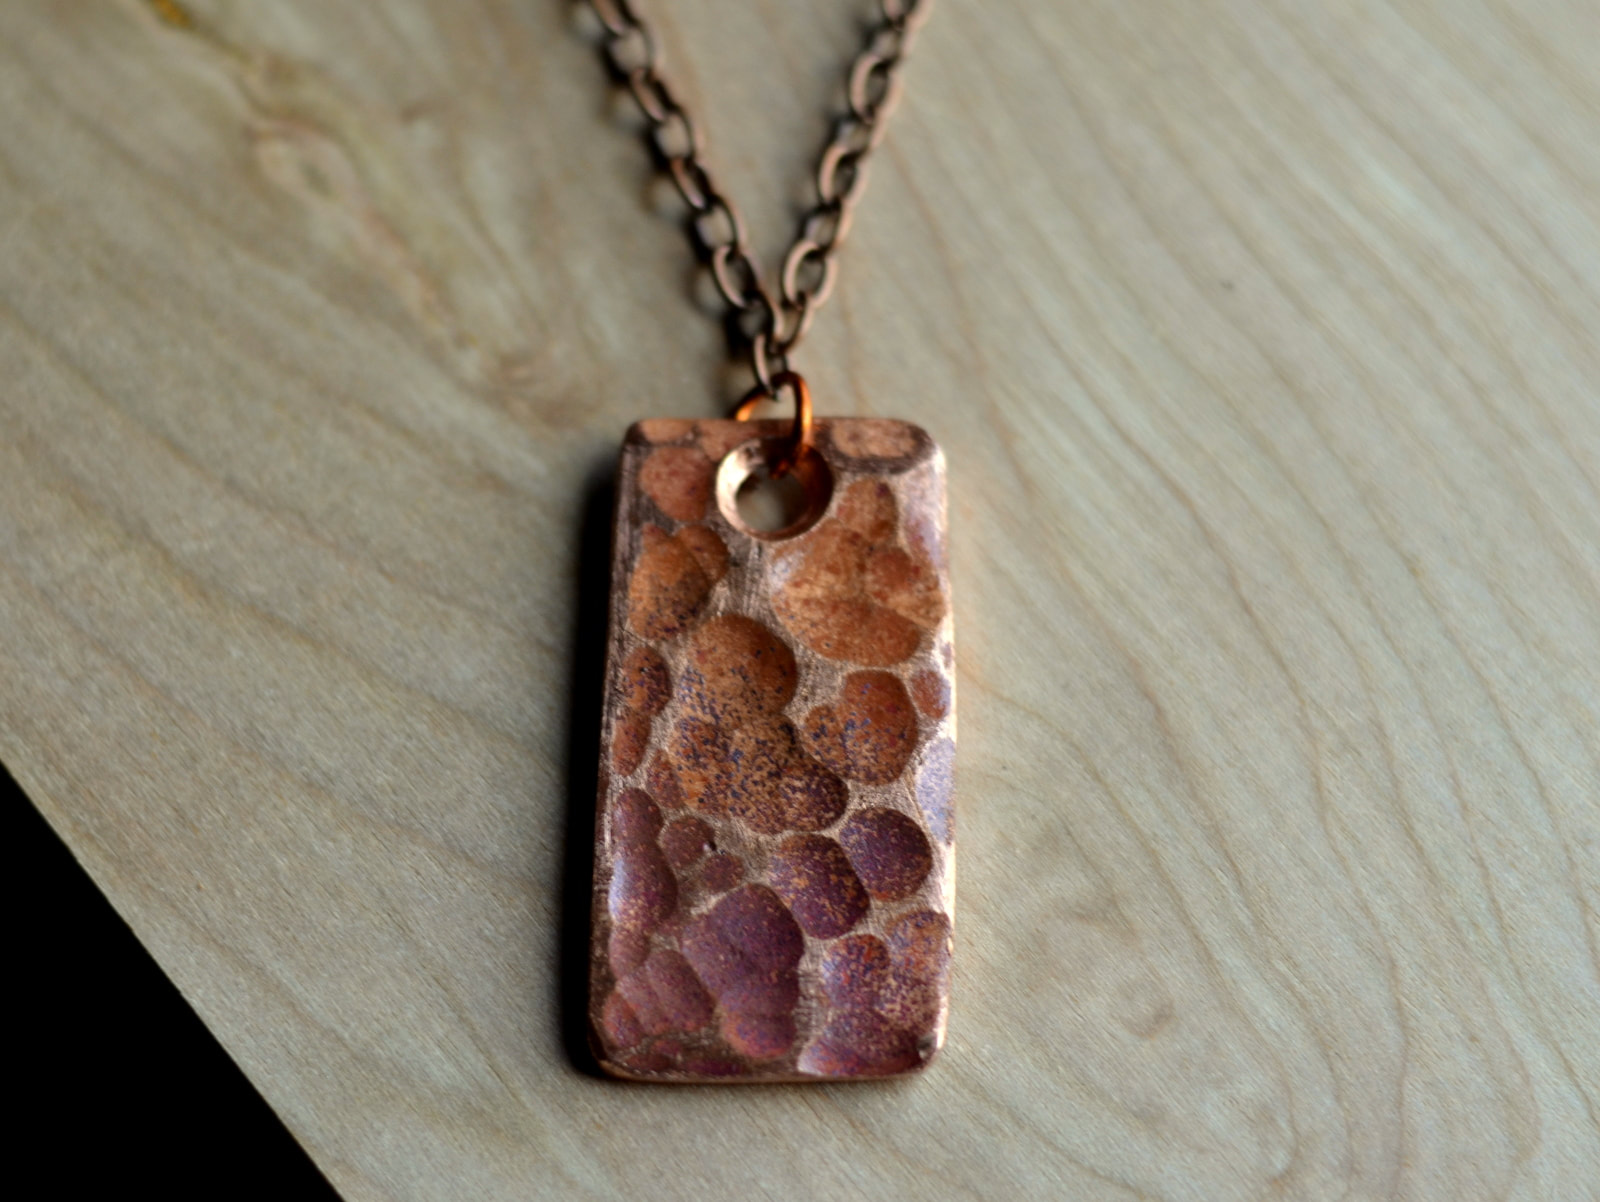 Hammered Copper Chain Link Necklace - Handcrafted Jewelry